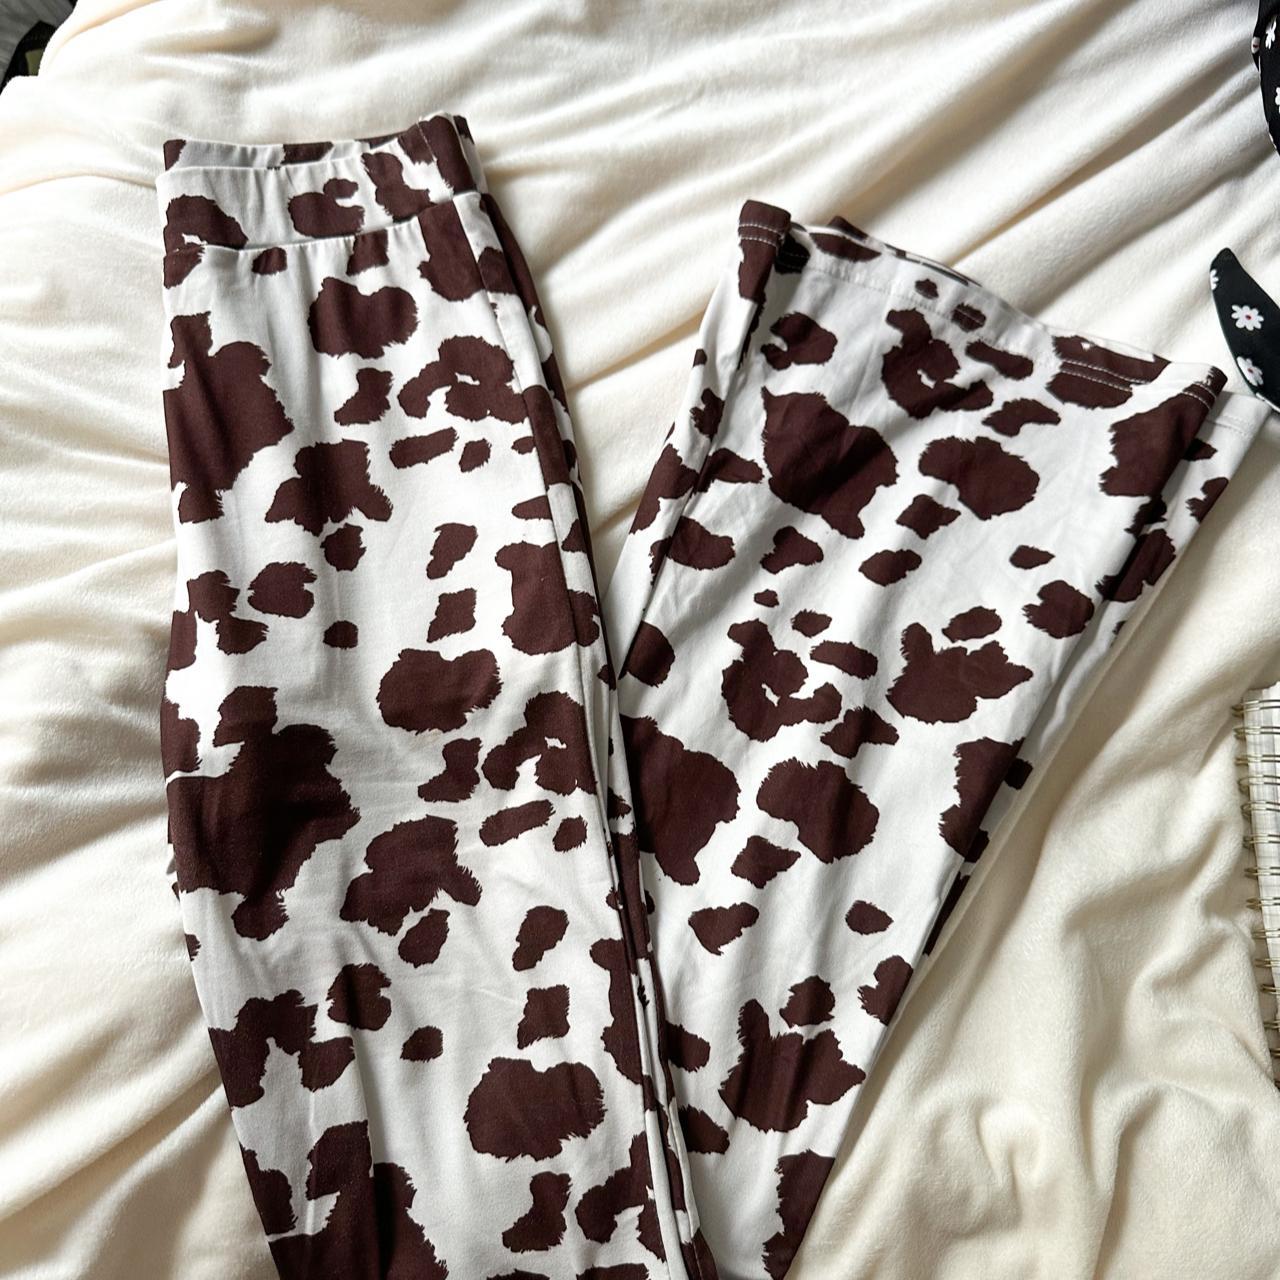 small soft bootcut cow print leggings worn once, - Depop